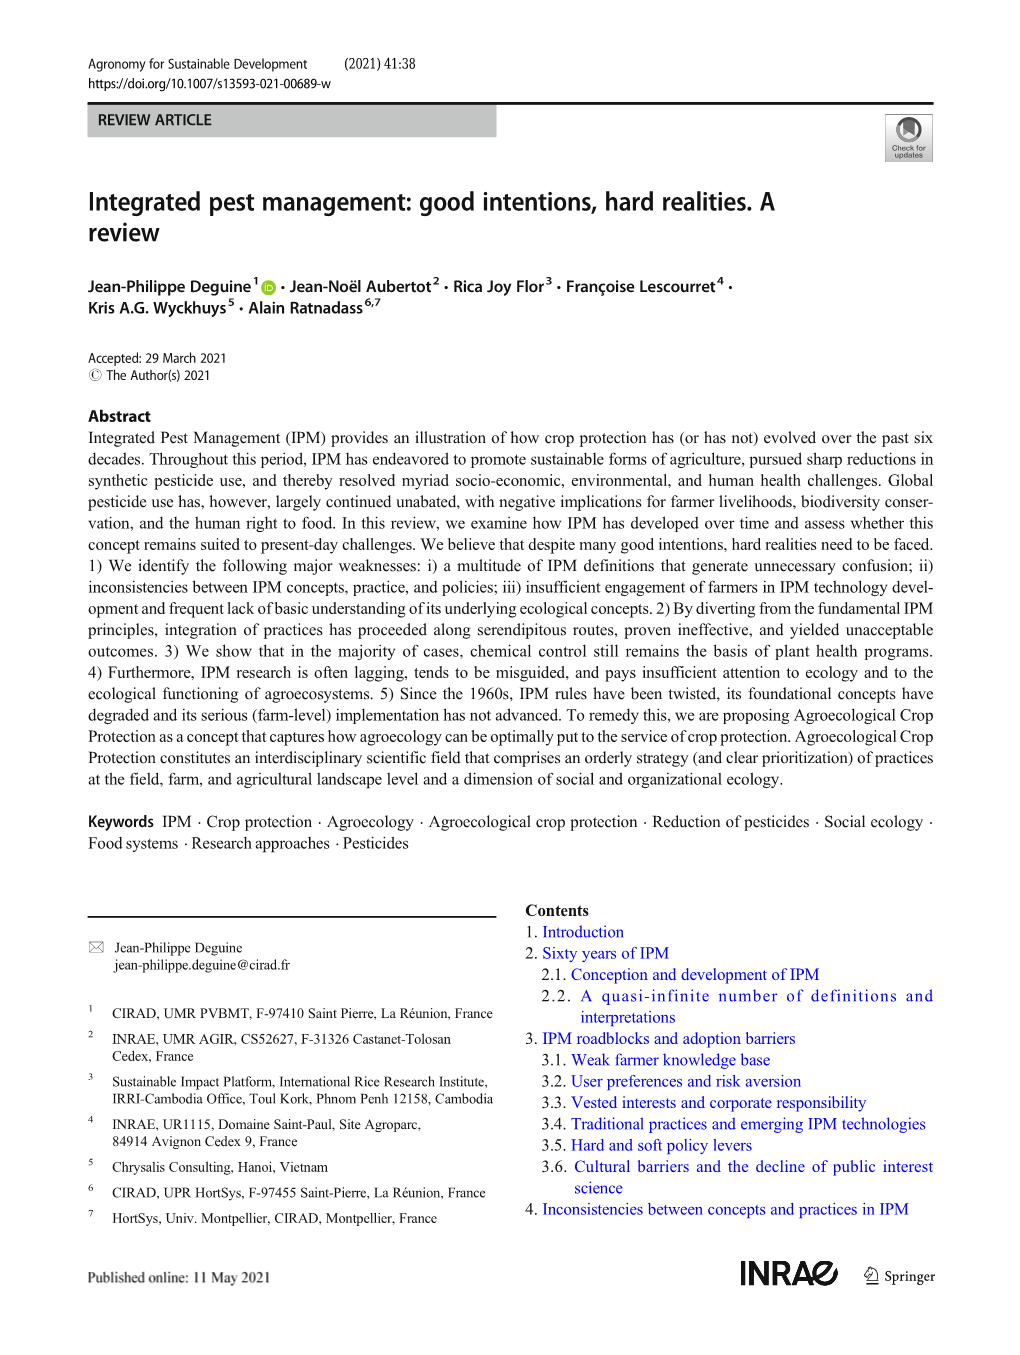 Integrated Pest Management: Good Intentions, Hard Realities